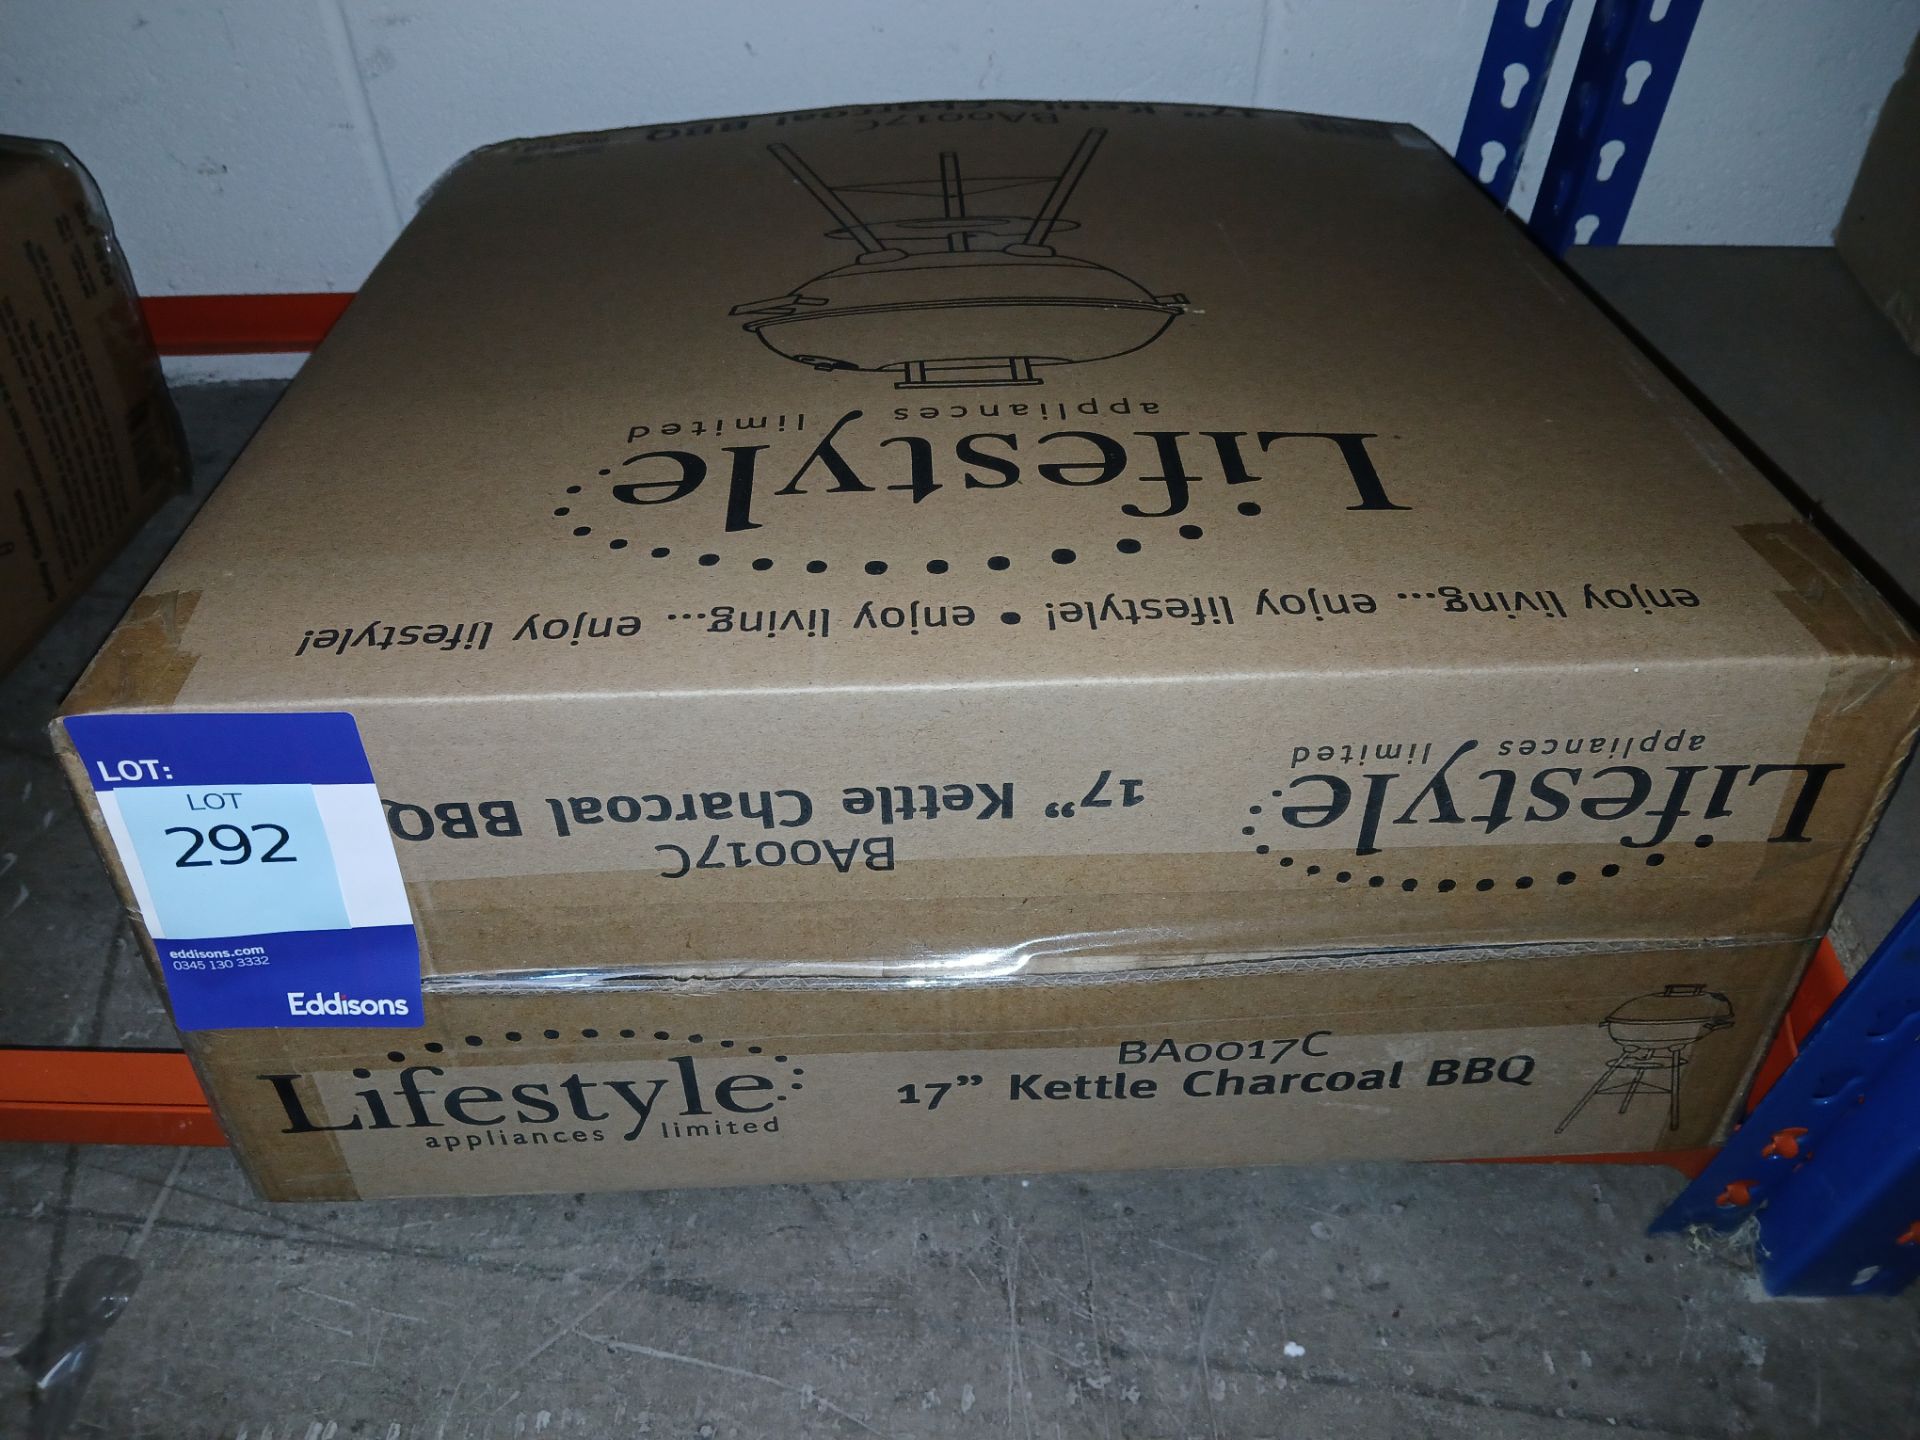 Lifestyle 17" Kettle Charcoal BBQ (Please note, Viewing Strongly Recommended - Eddisons have not